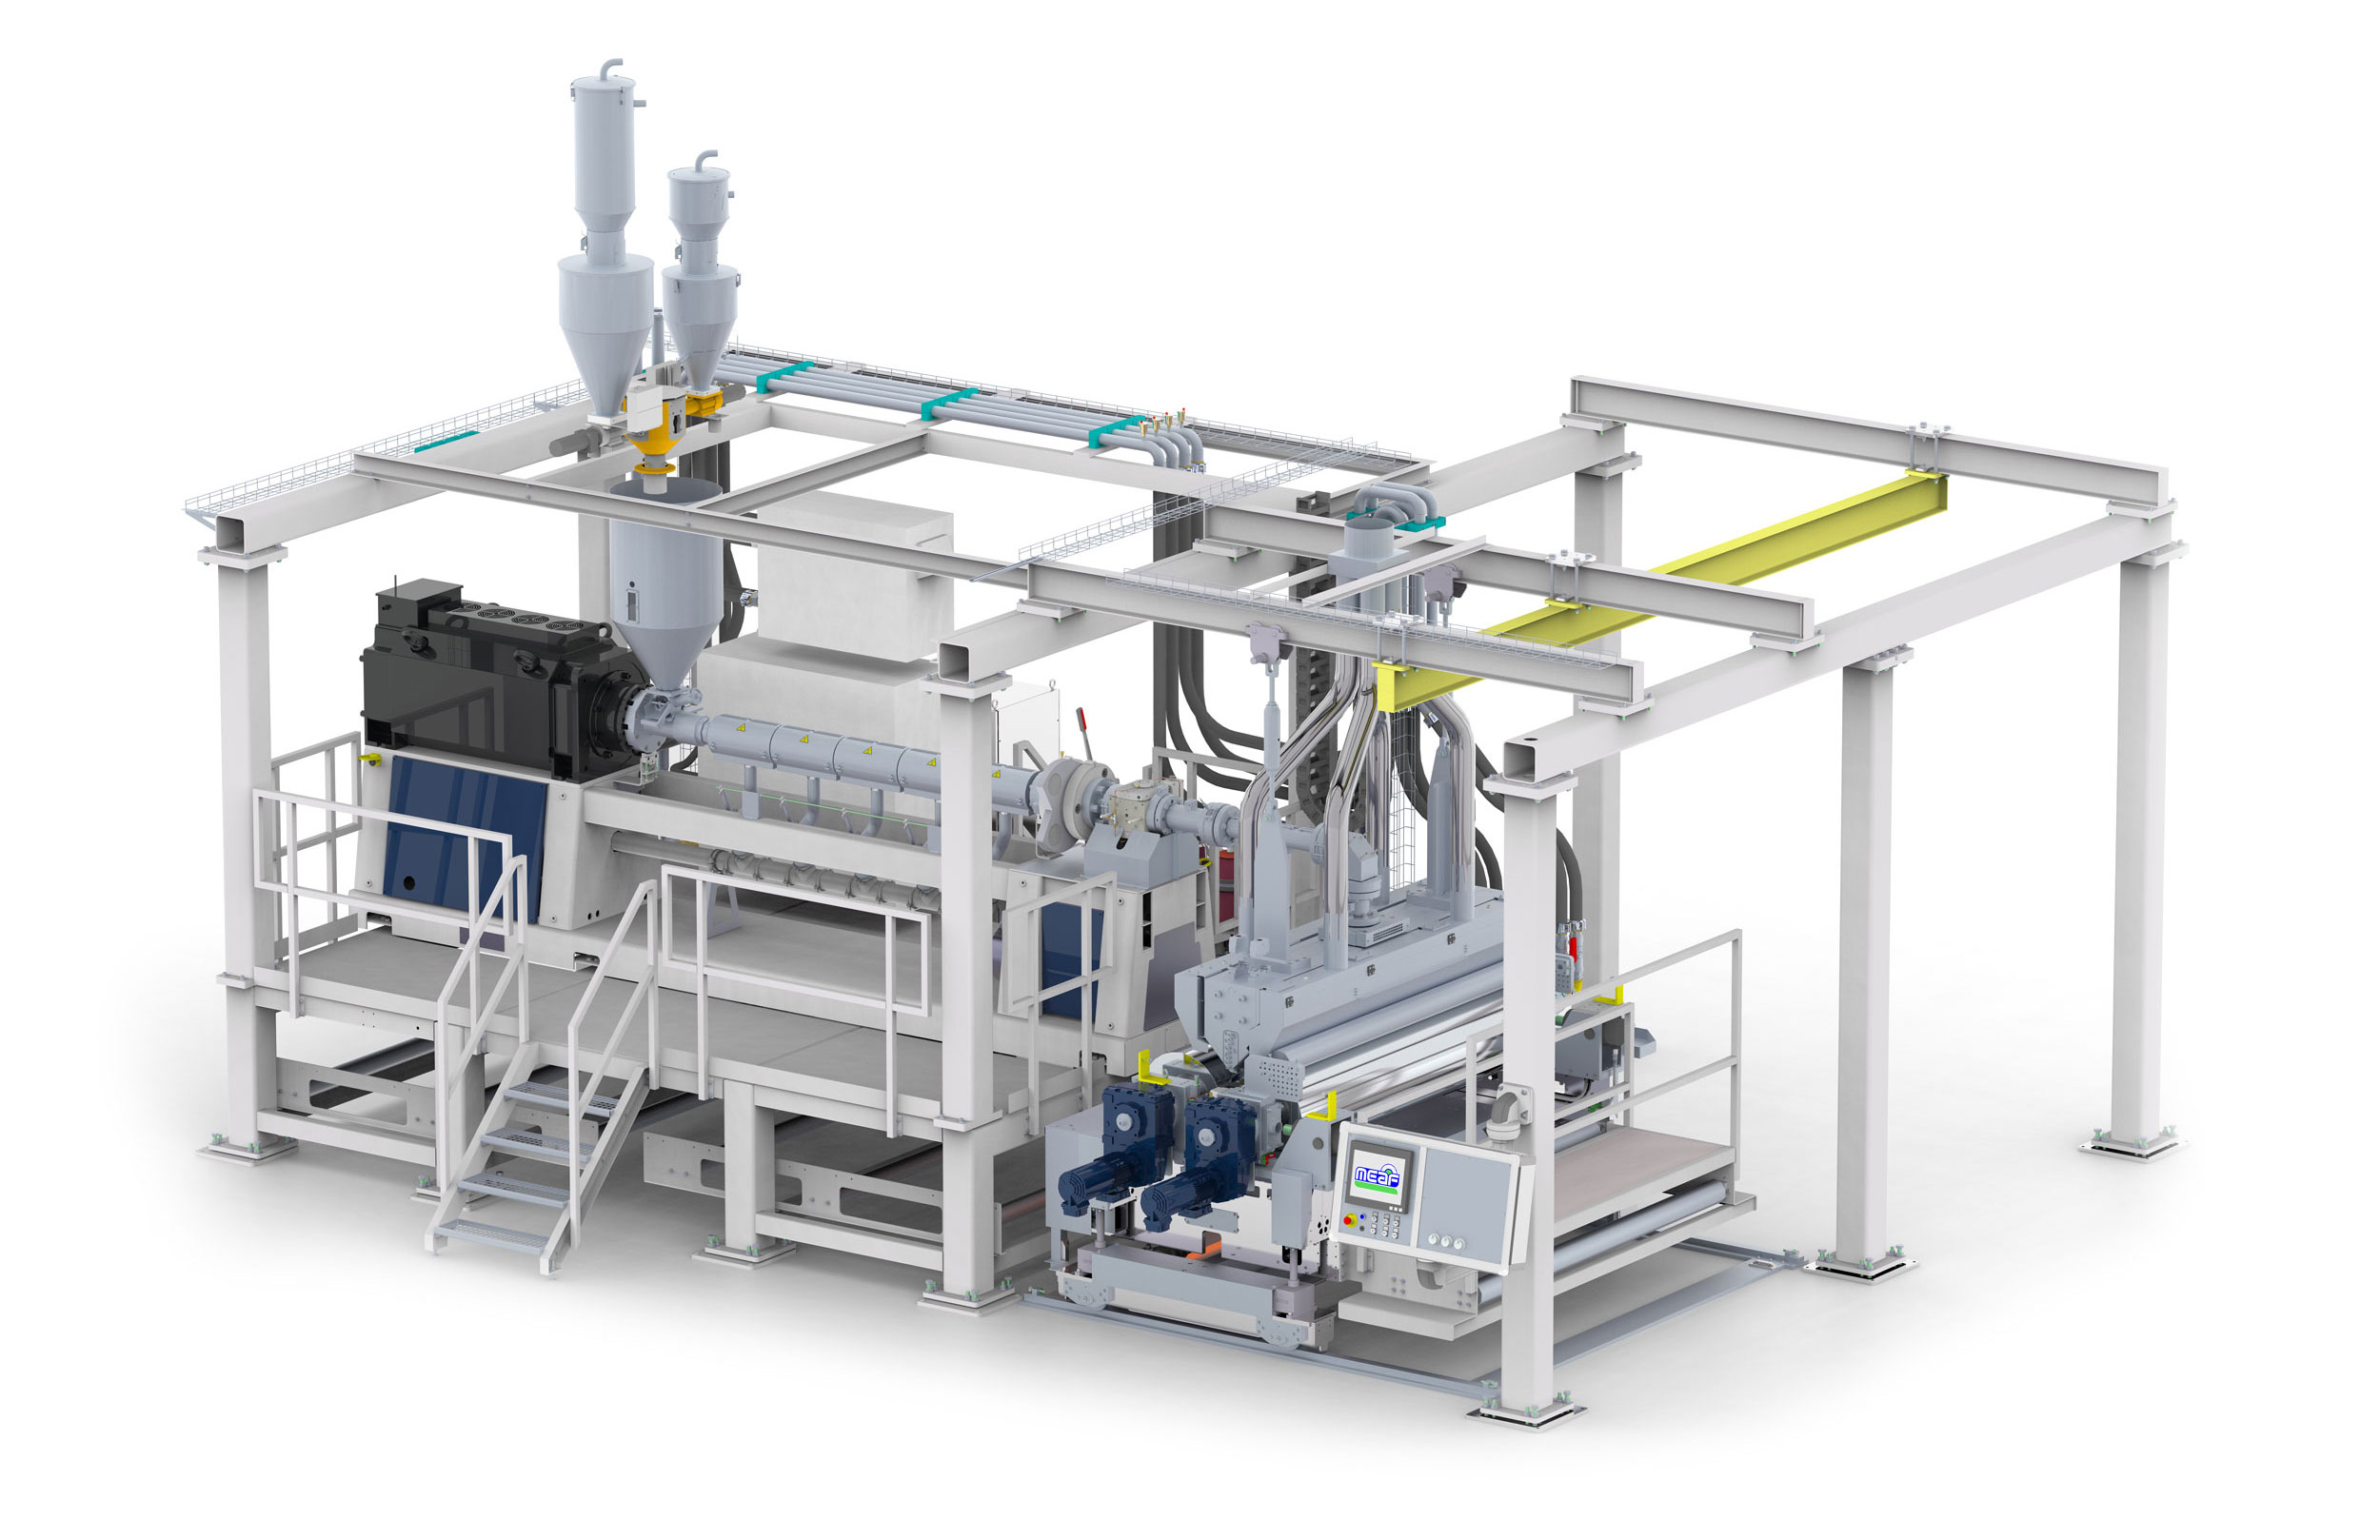 MEAF extrusion coating line for carpet, automat and artifical grass backing